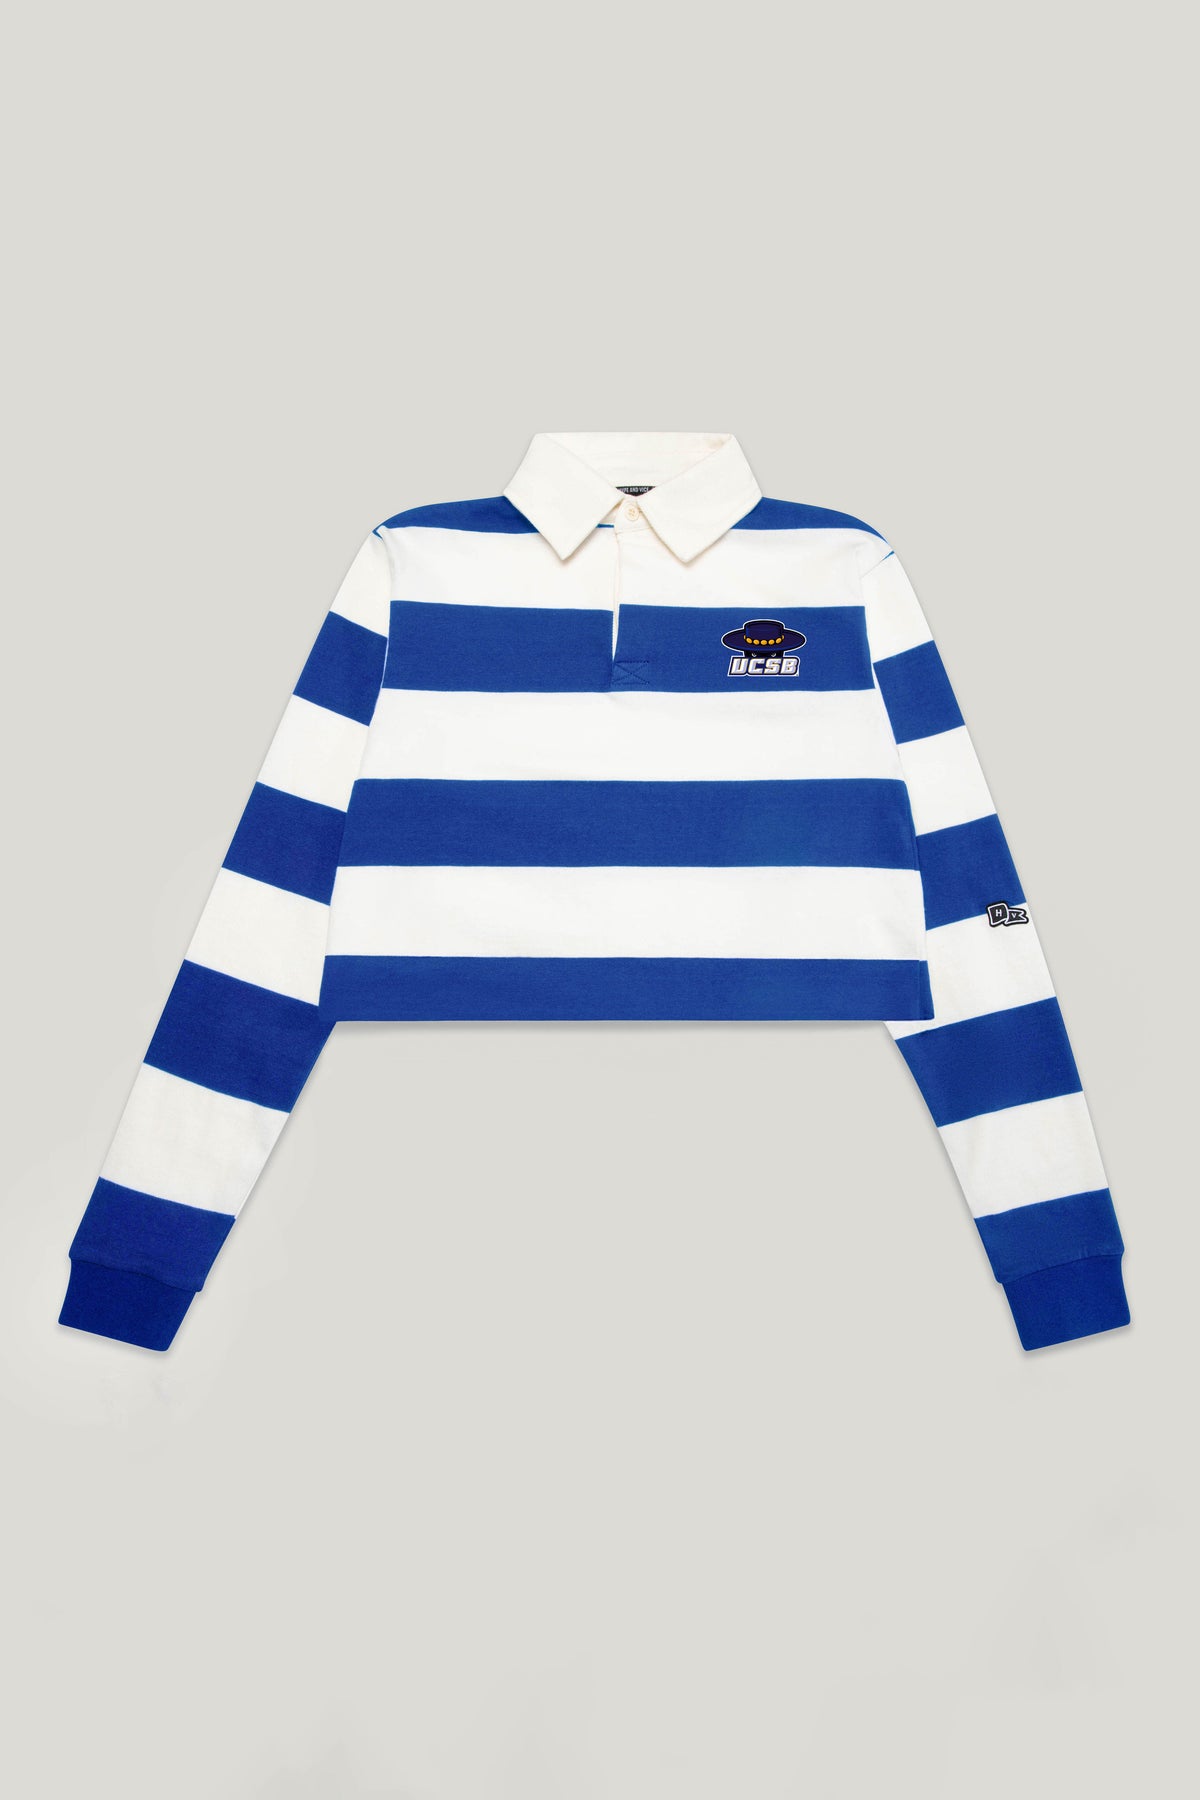 UCSB Rugby Top